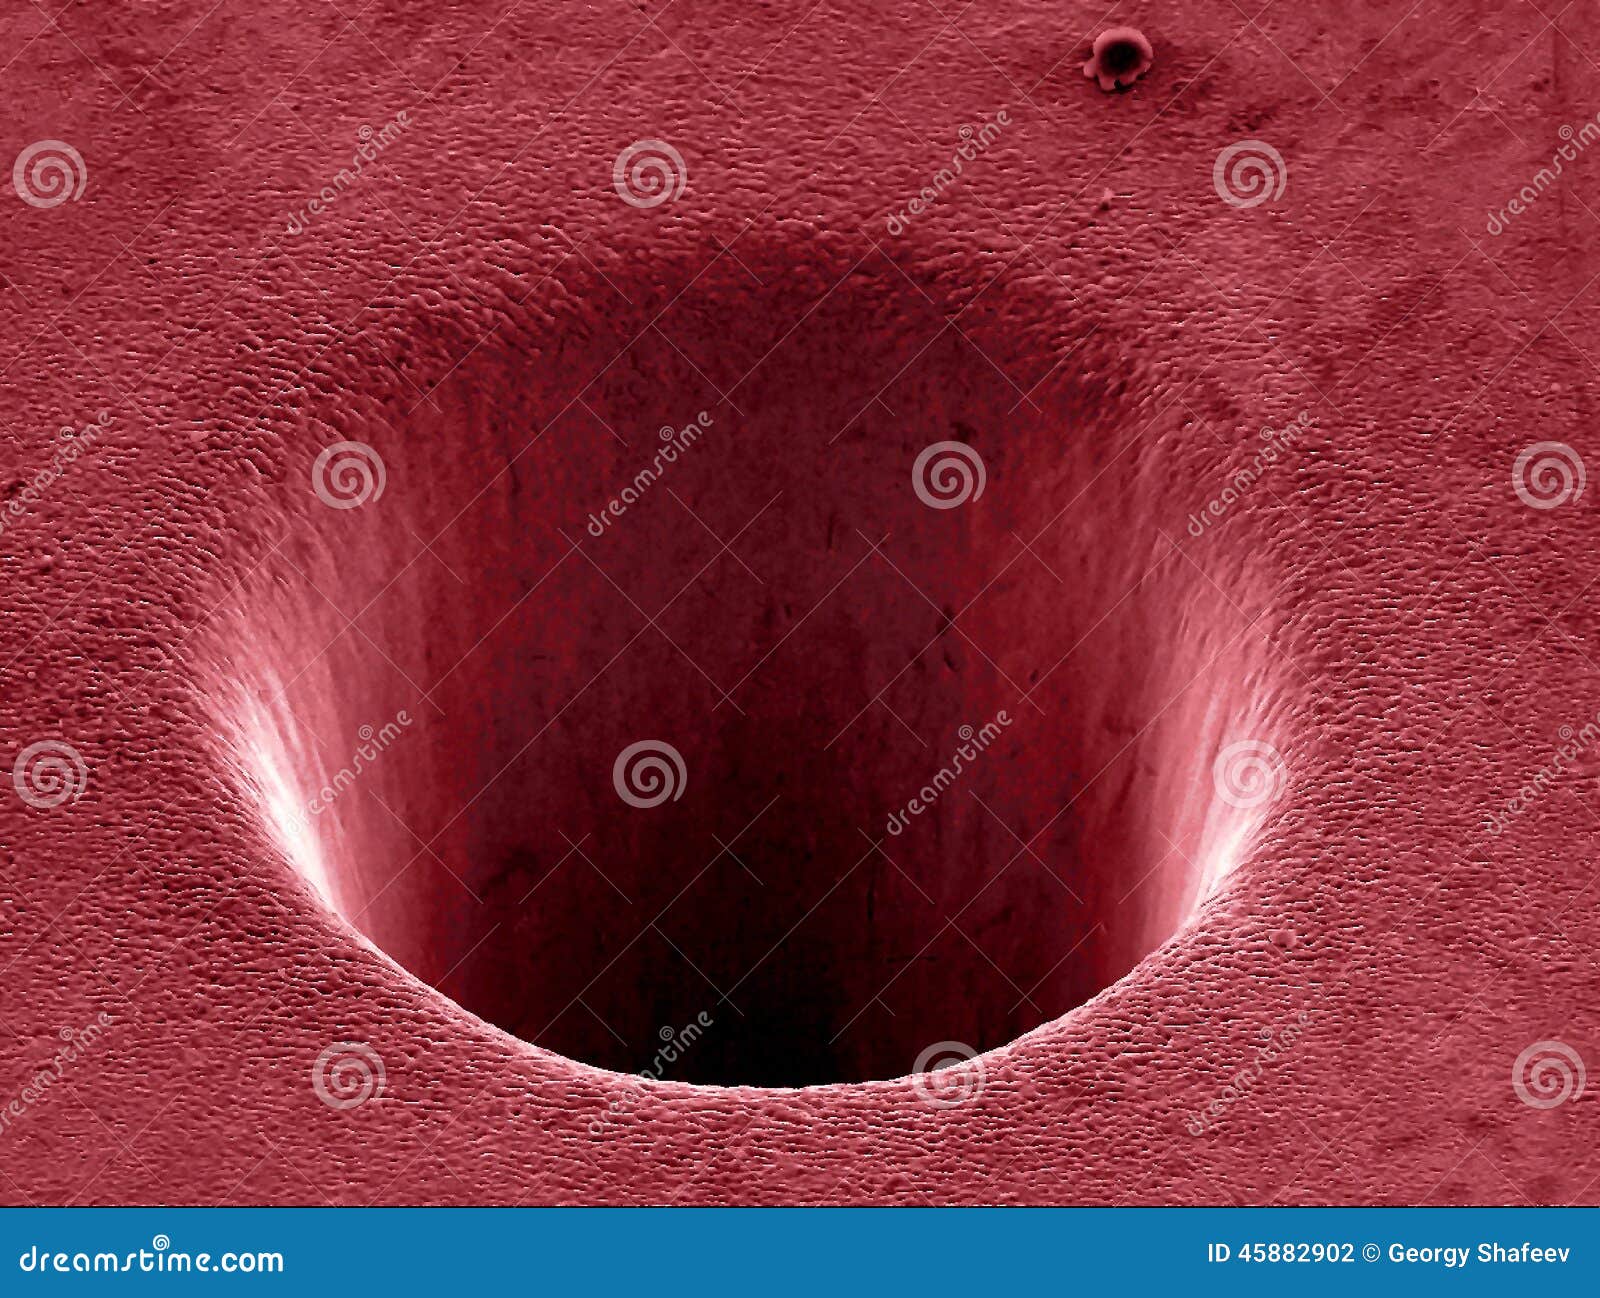 crater in metal drilled by laser beam